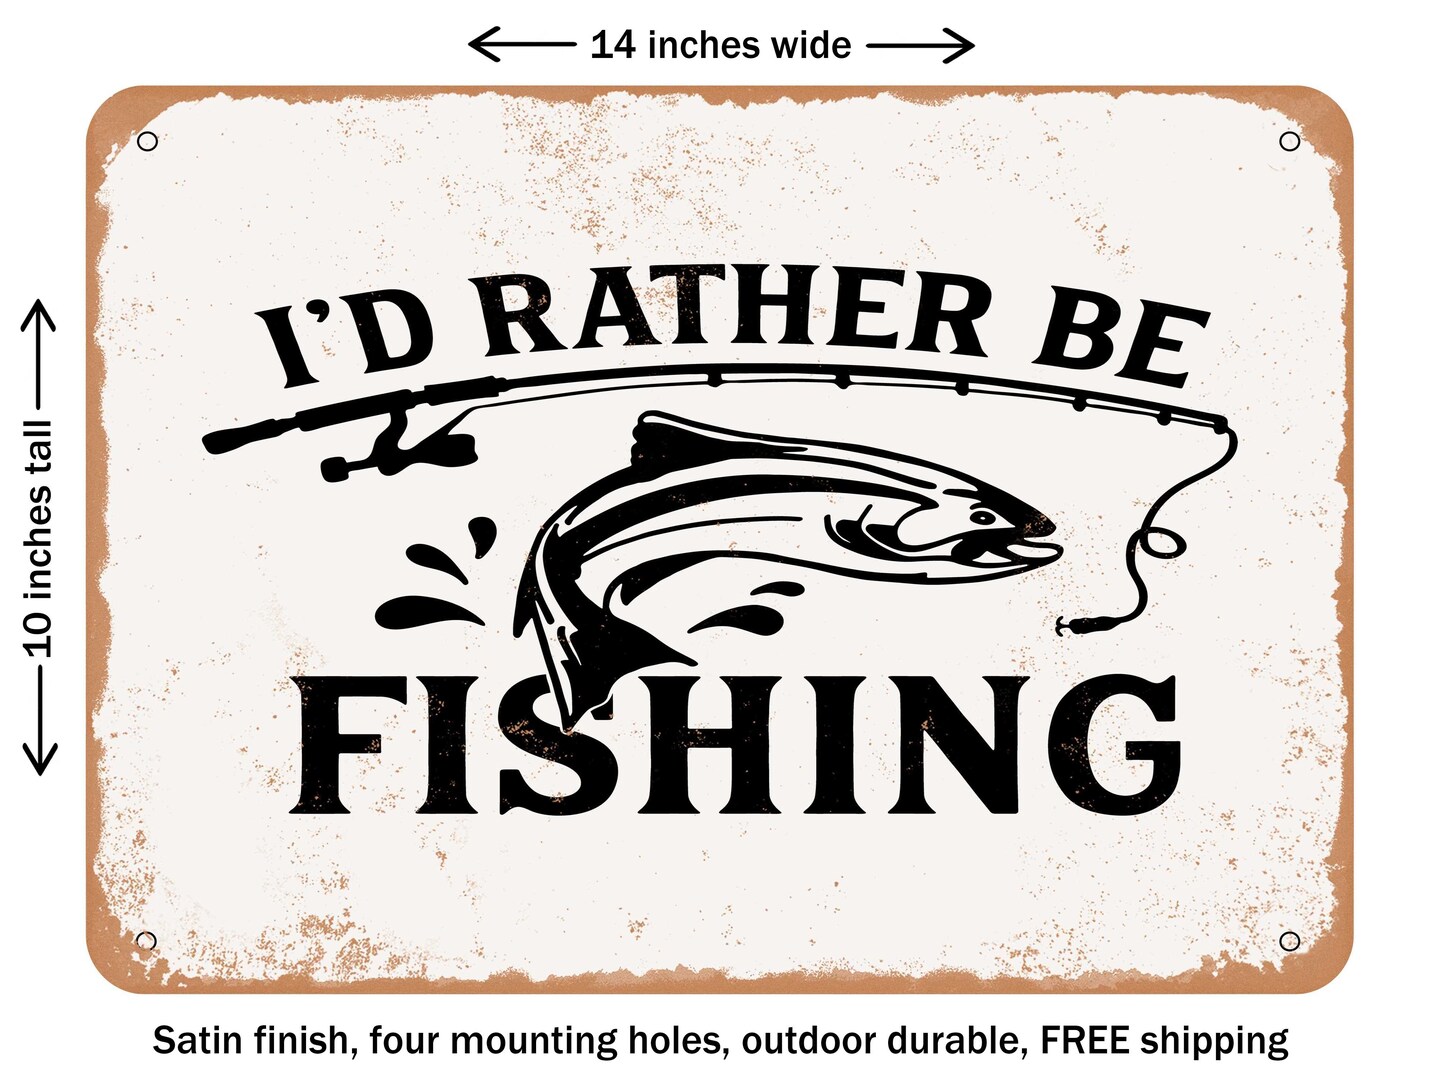 DECORATIVE METAL SIGN - Id Rather Be Fishing - 2 - Vintage Rusty